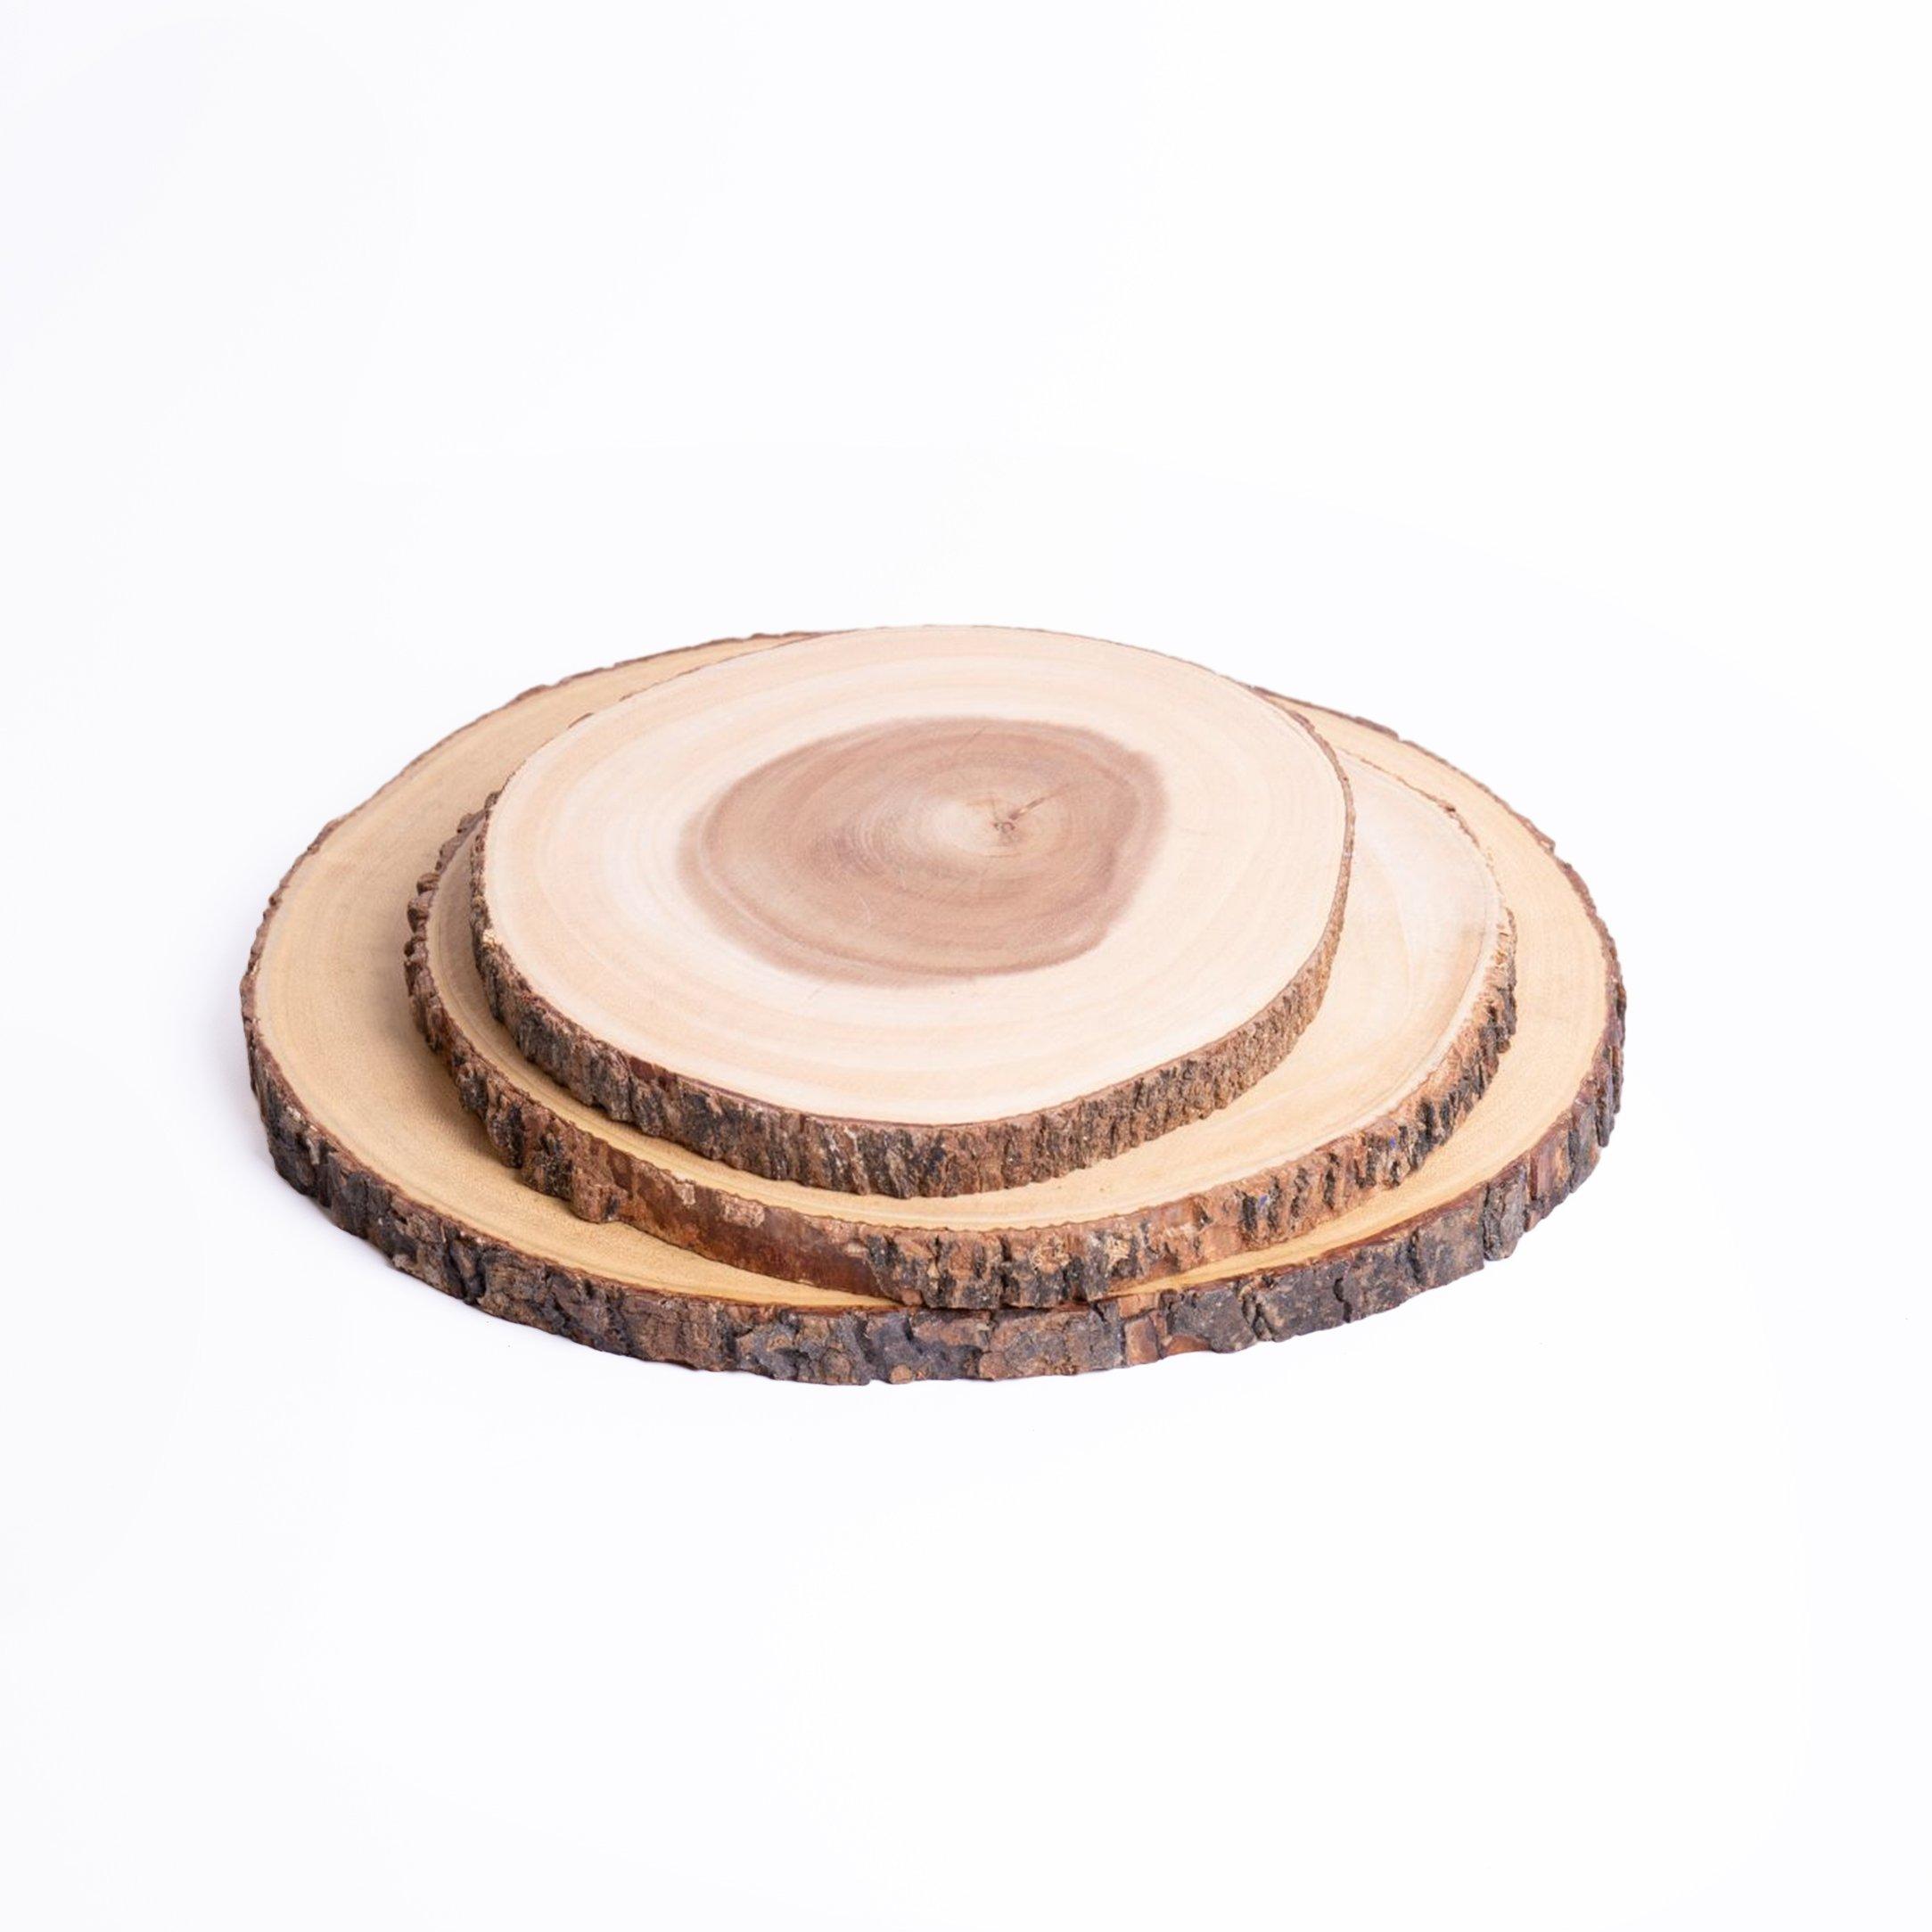 Wooden Serving Board Set with Small, Medium and Large Acacia Wood Round Serving Boards